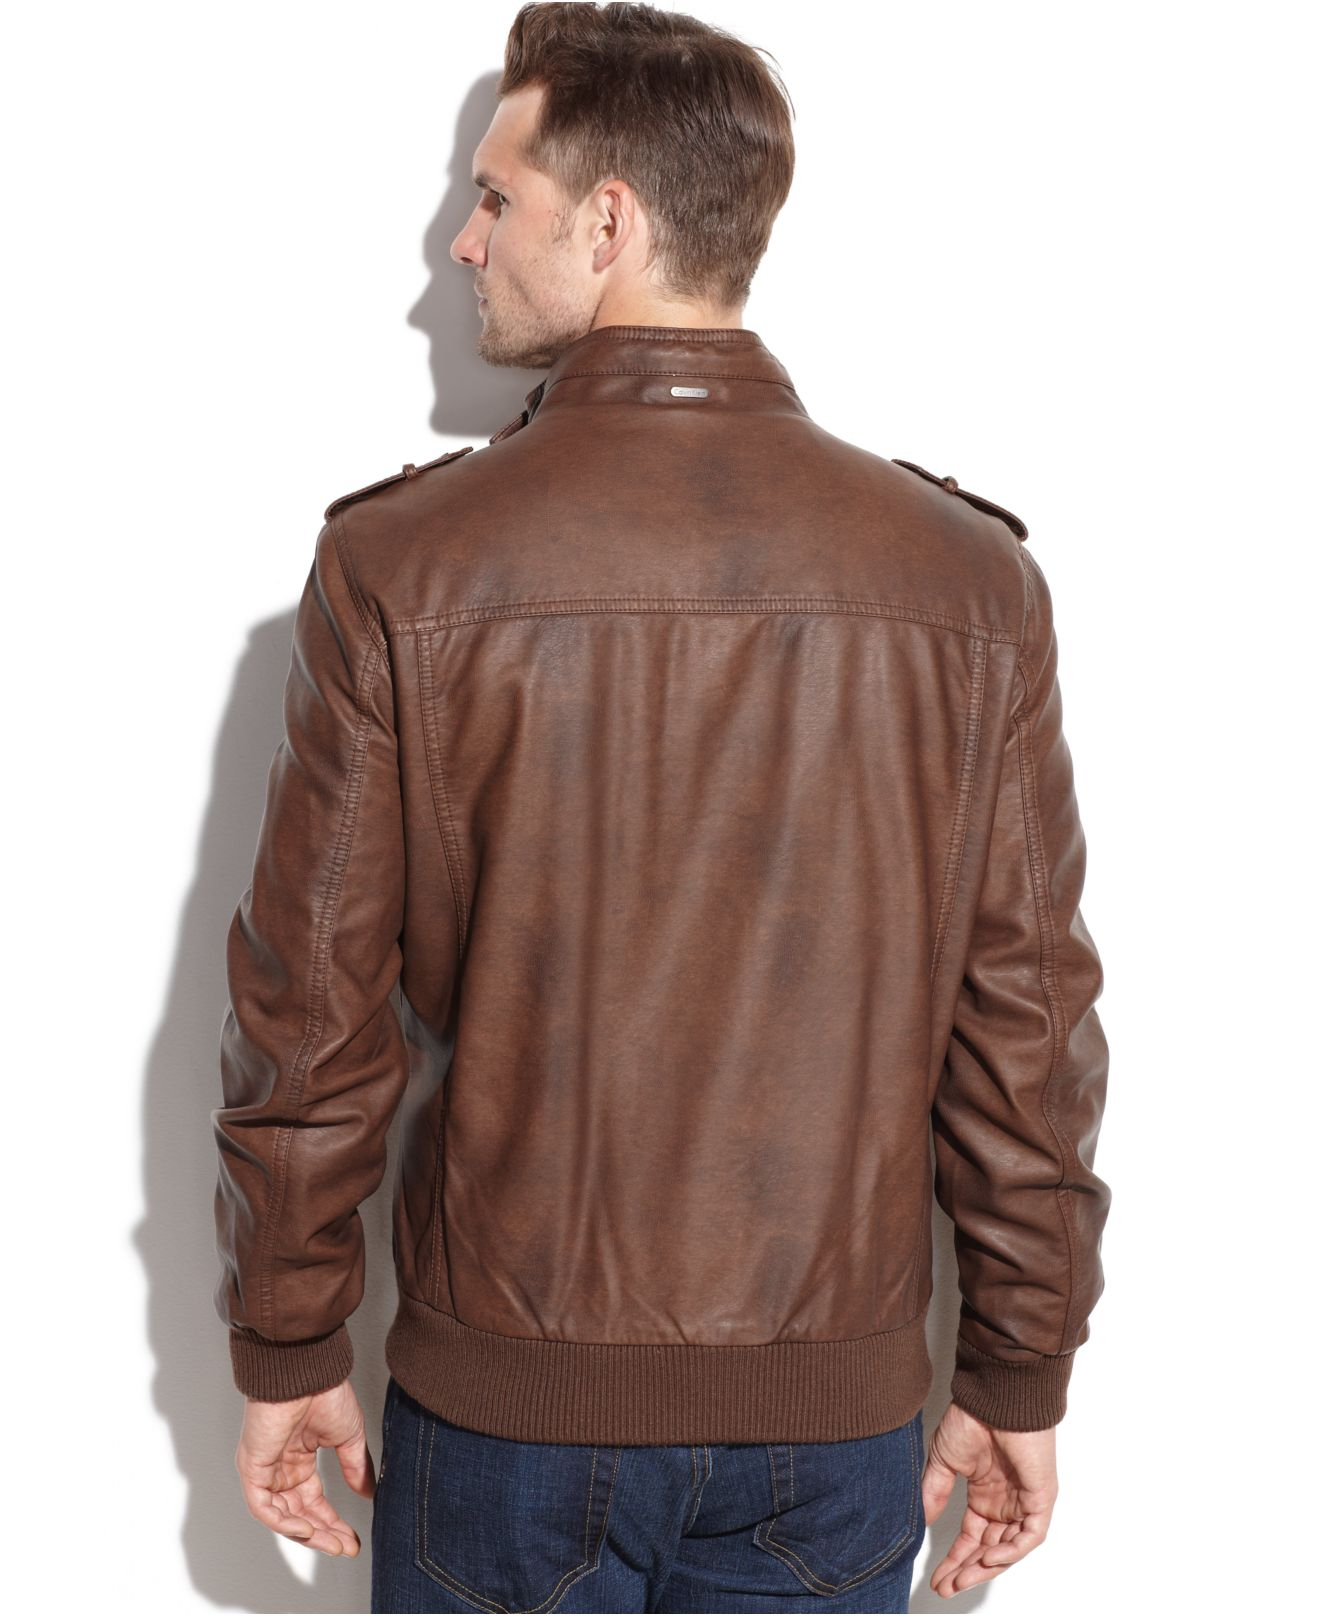 Lyst - Calvin Klein Faux Leather Bomber Jacket in Brown for Men